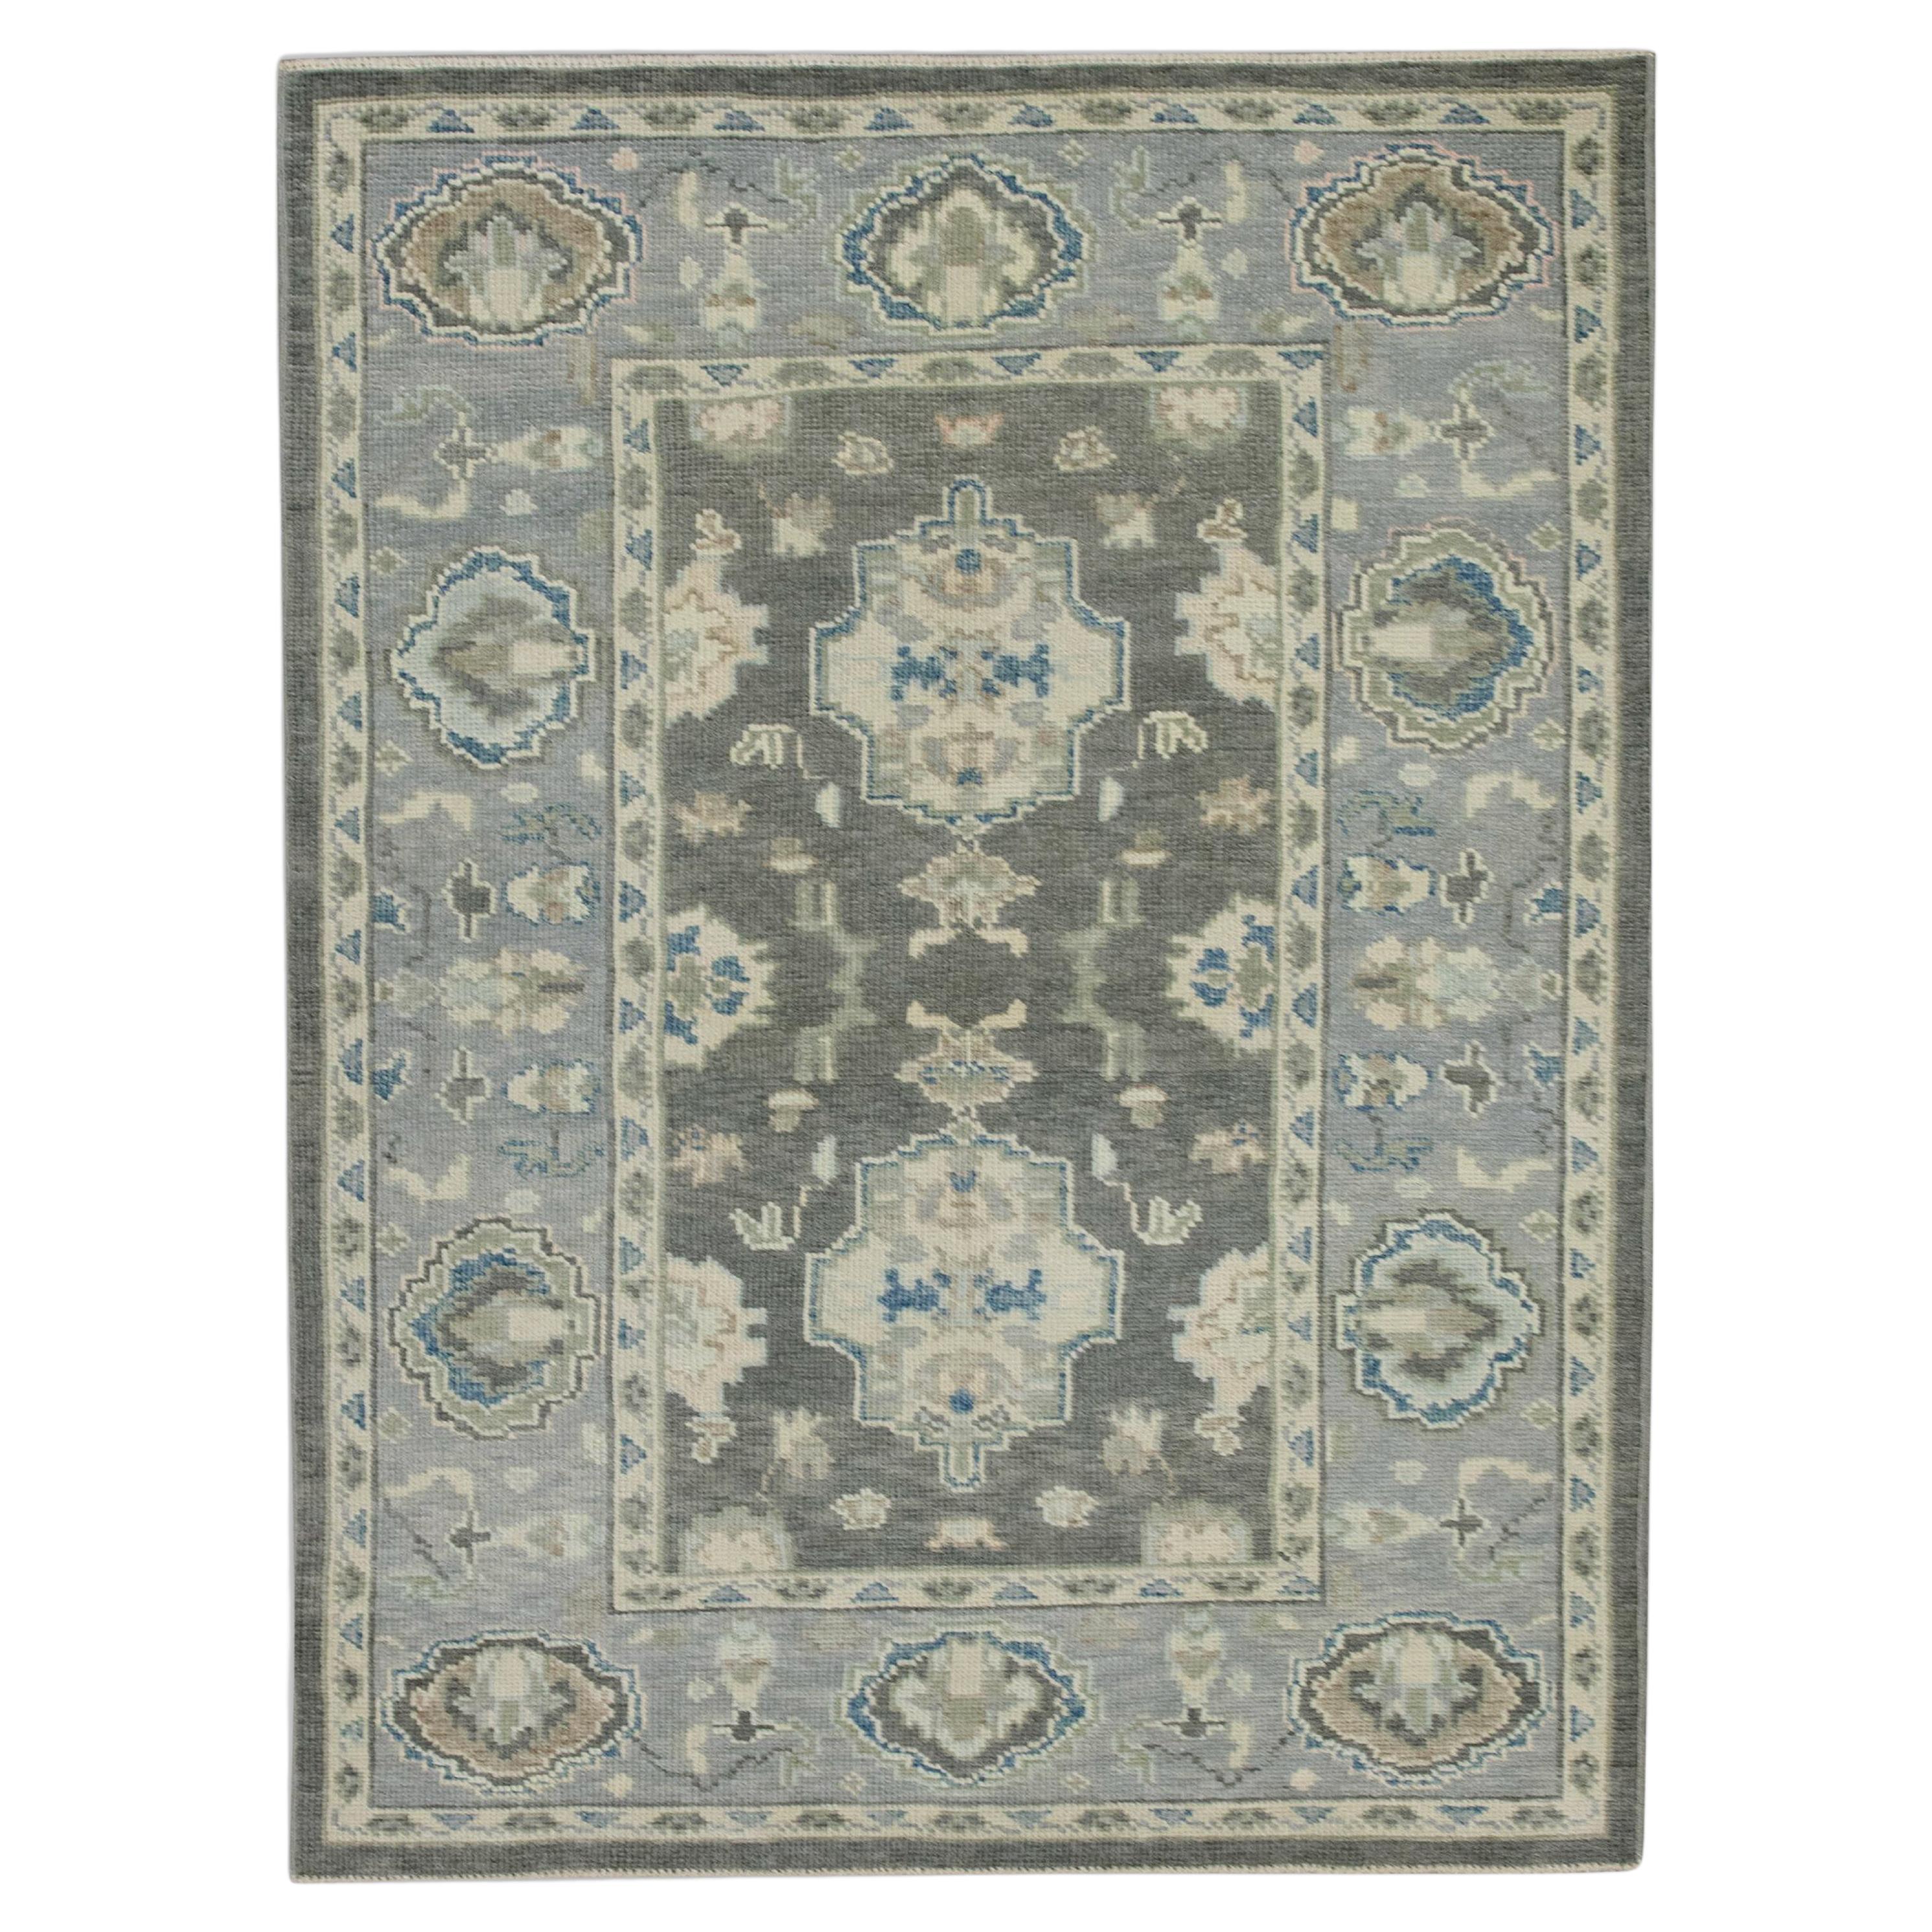 Gray Floral Design Handwoven Wool Turkish Oushak Rug 3'11" x 5'9" For Sale